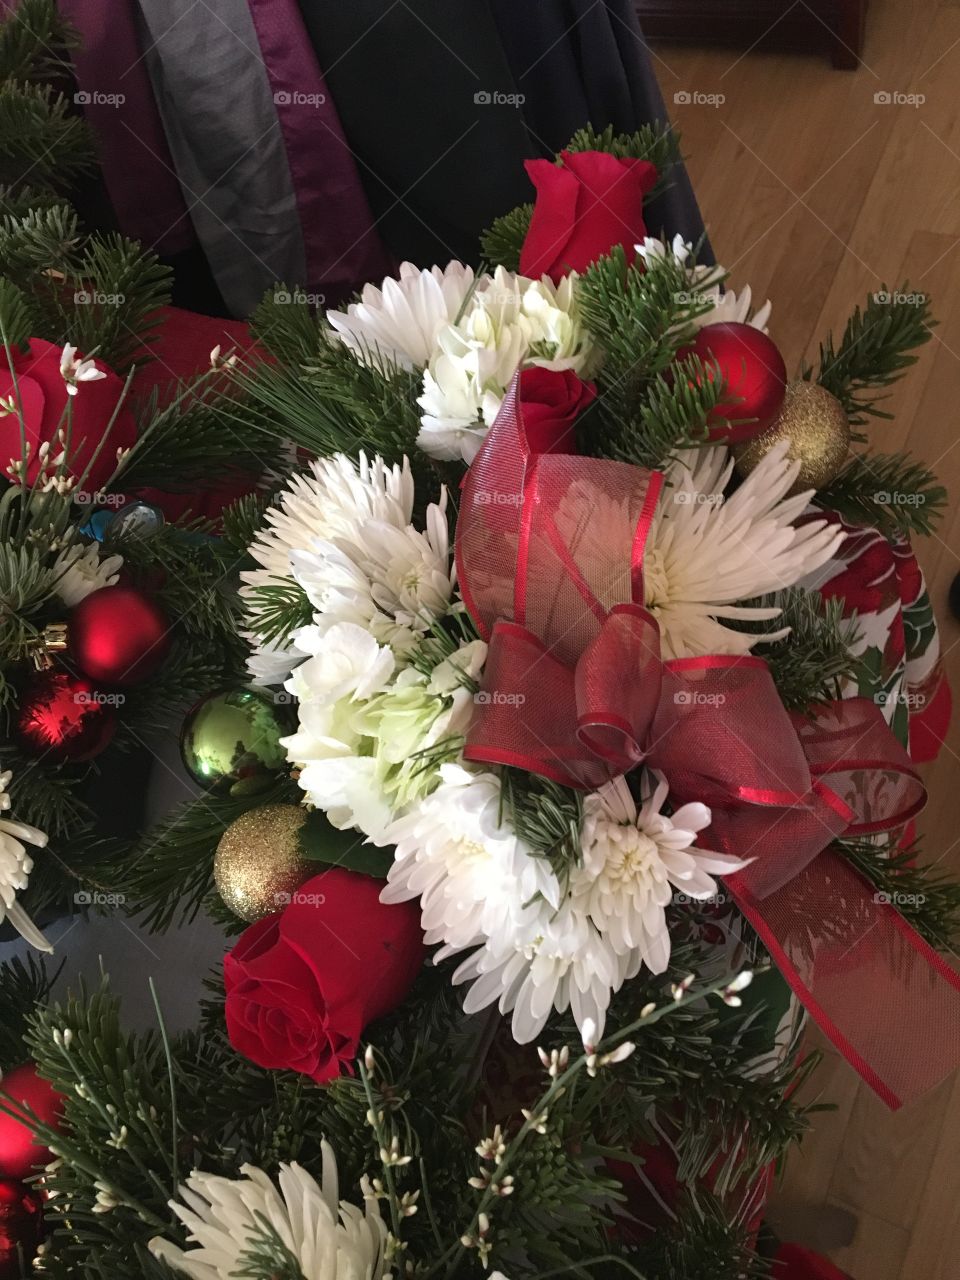 Red bow on Christmas centerpiece with green and gold Christmas bulbs. Red roses green pom-pom pine needles